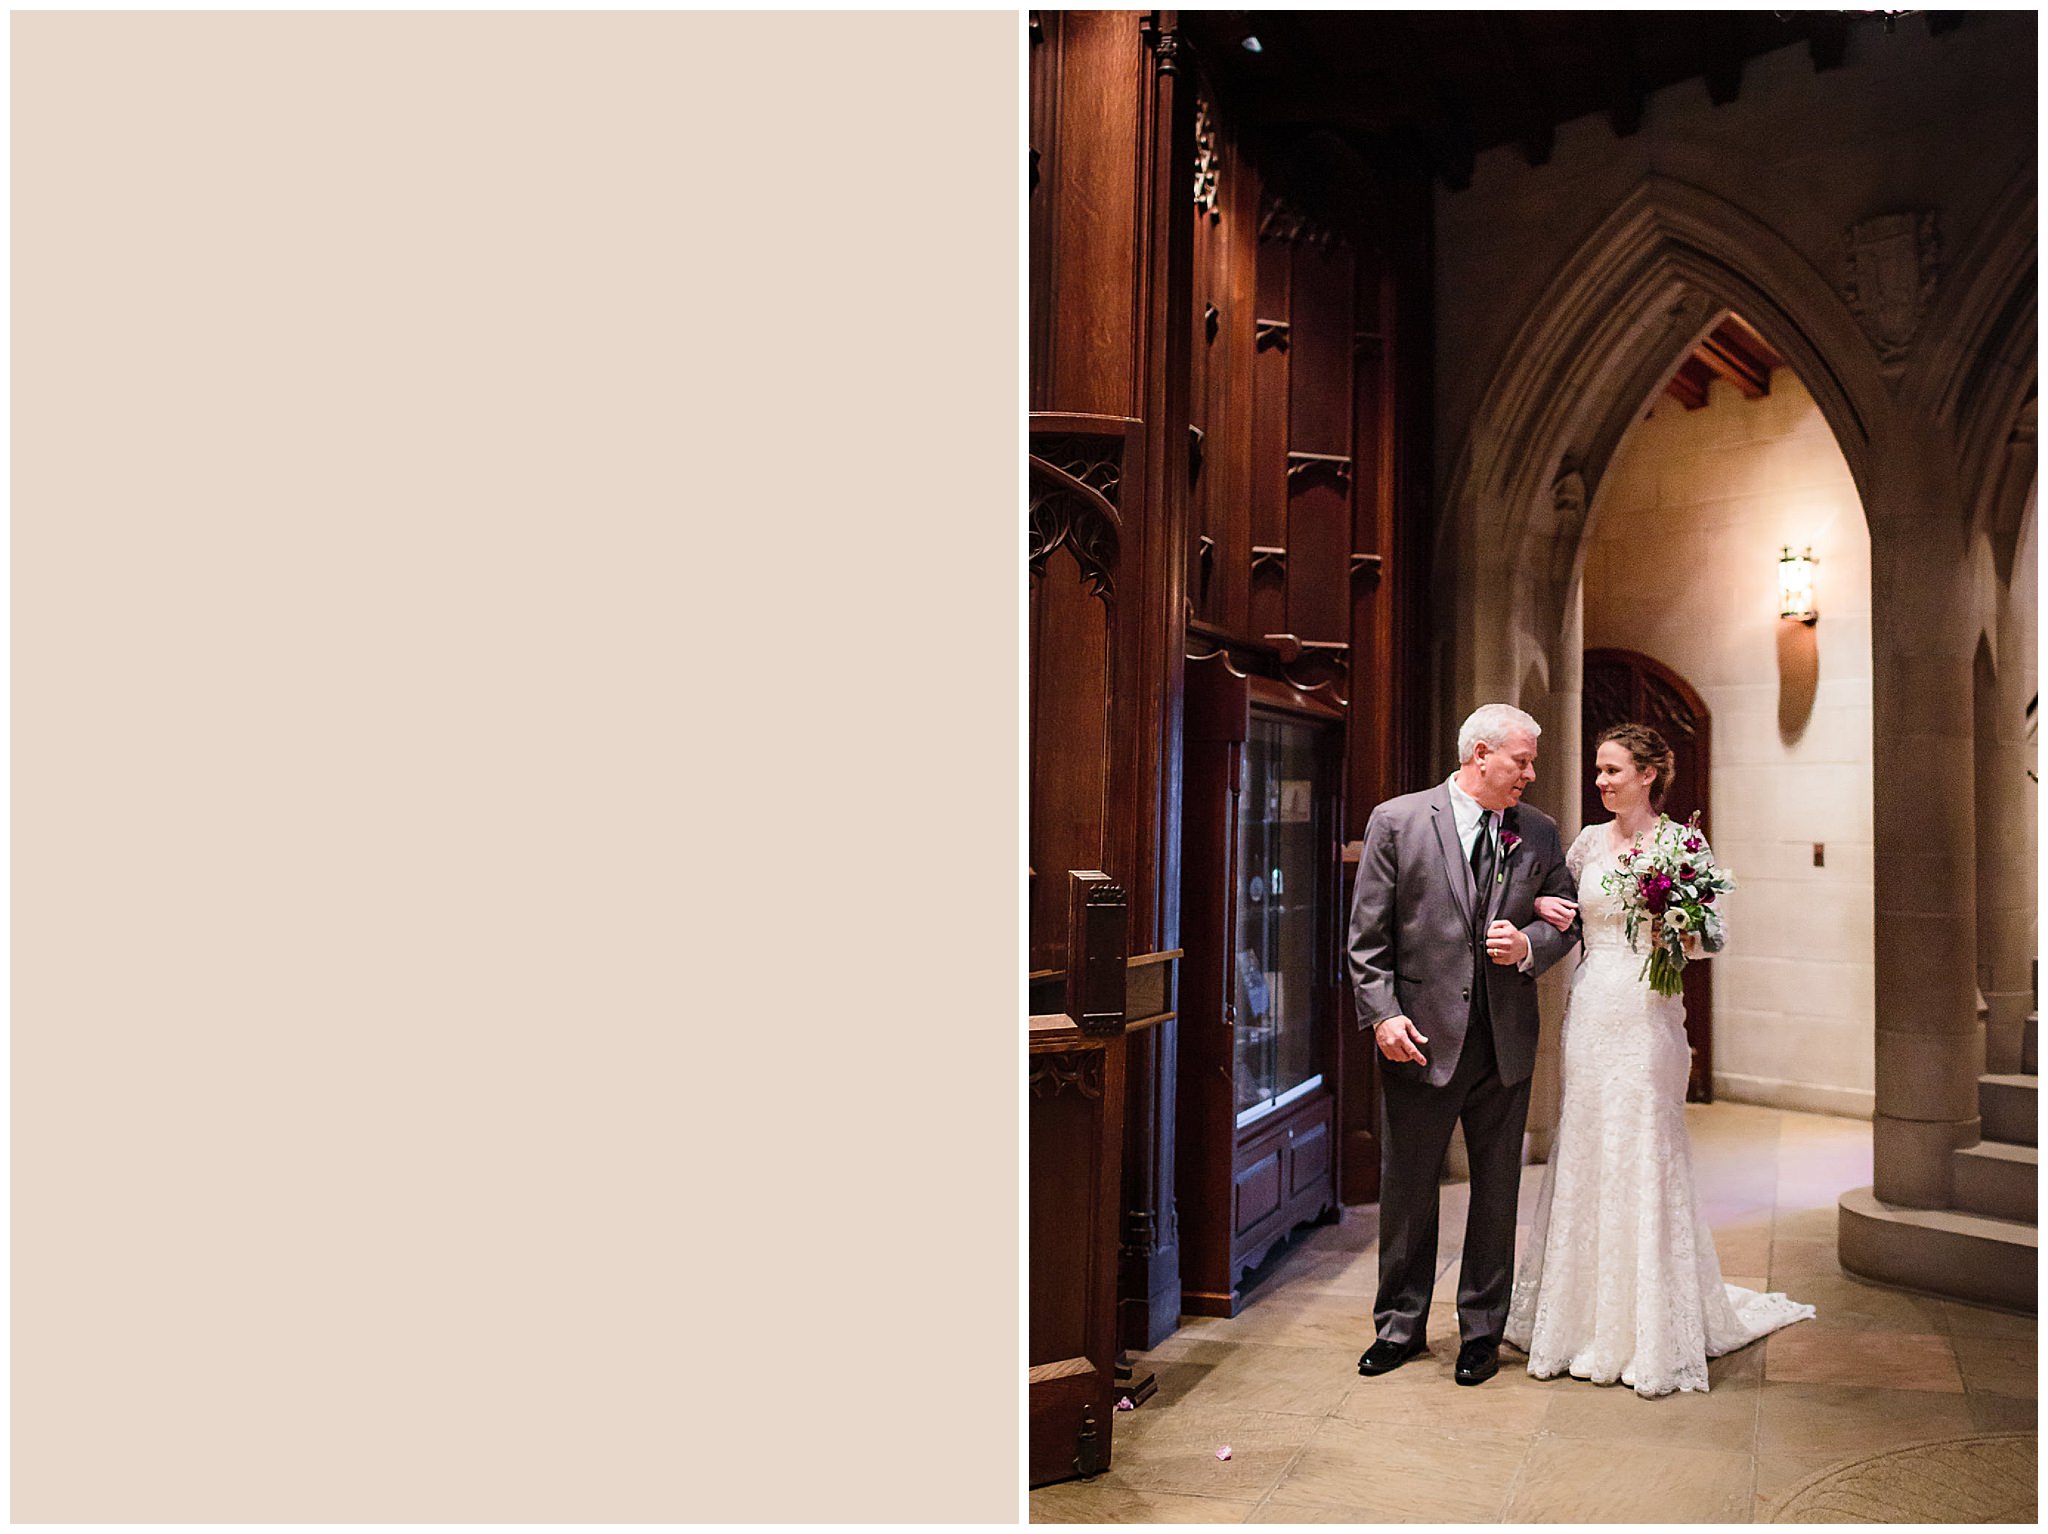 Bride & her father share a moment before walking down the aisle of Heinz Chapel in Pittsburgh, PA